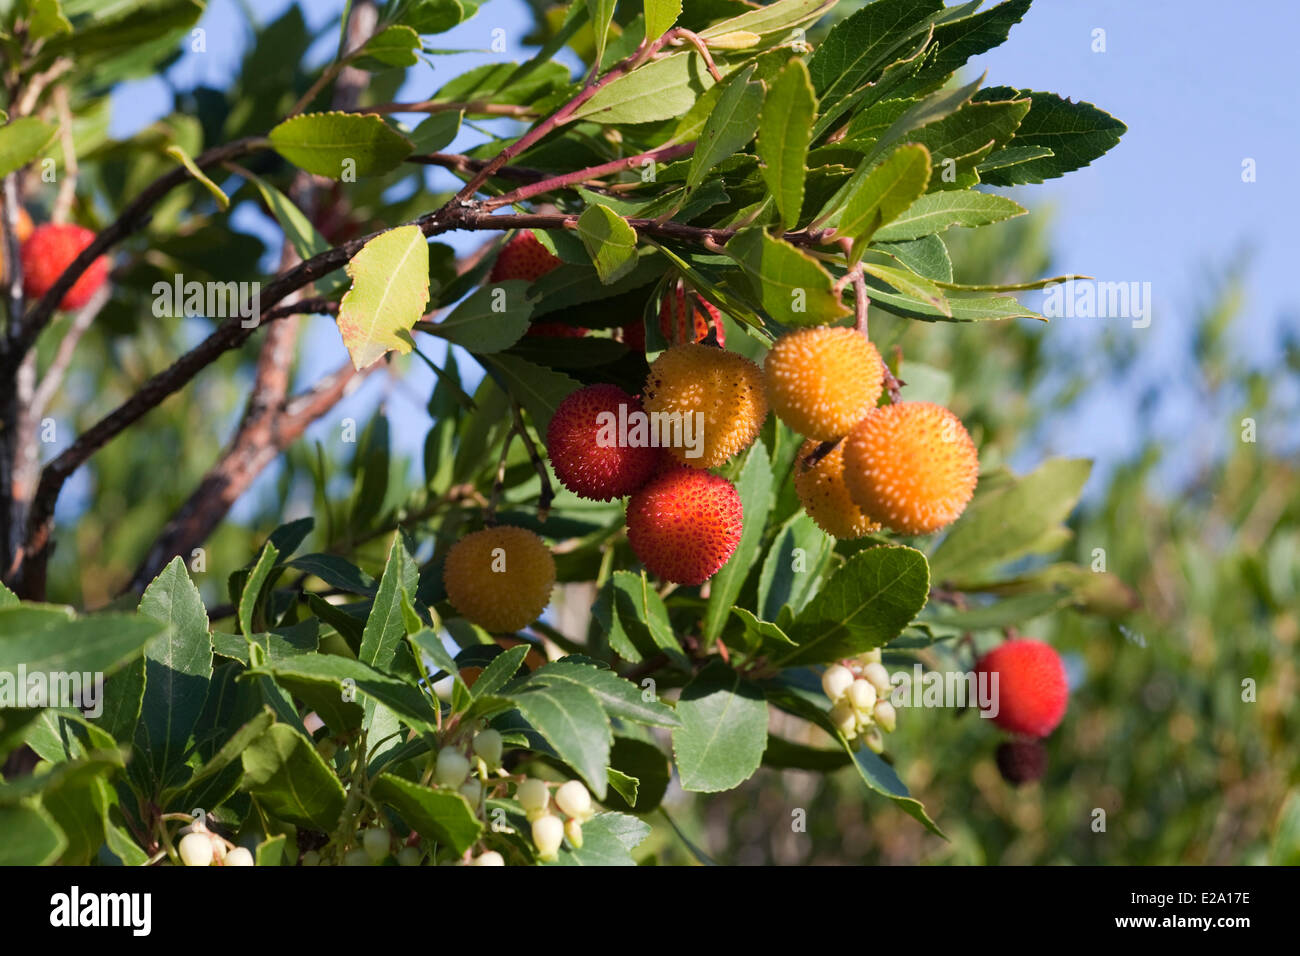 France, Corse, Ericales, Ericaceae, Strawberry Tree, Apple of Cain (Arbutus unedo), two coloured fruits and flowers Stock Photo